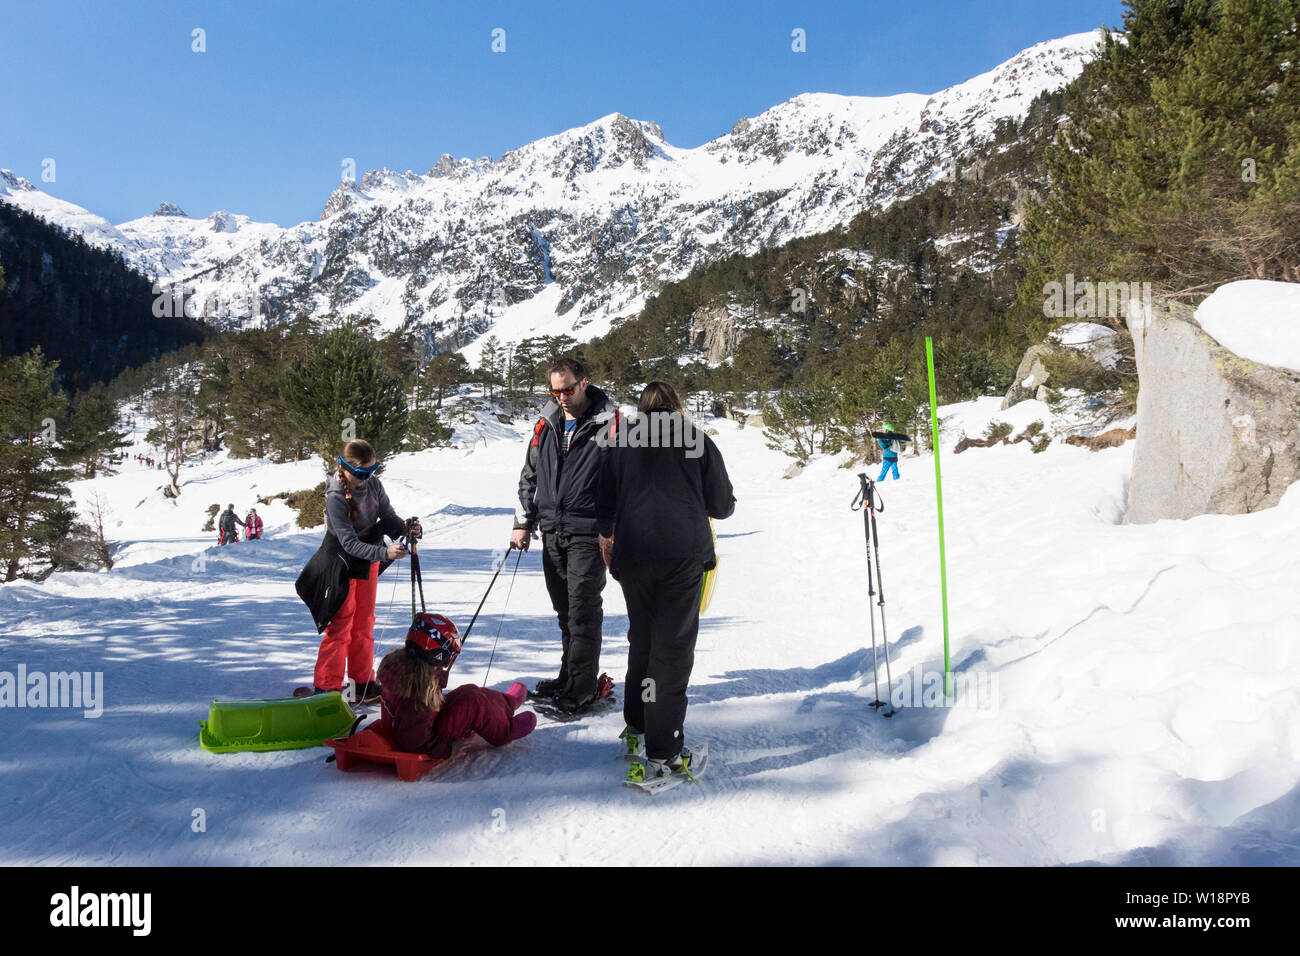 The central Pyrenees at Pont Espagne. A family enjoying the snow. Stock Photo